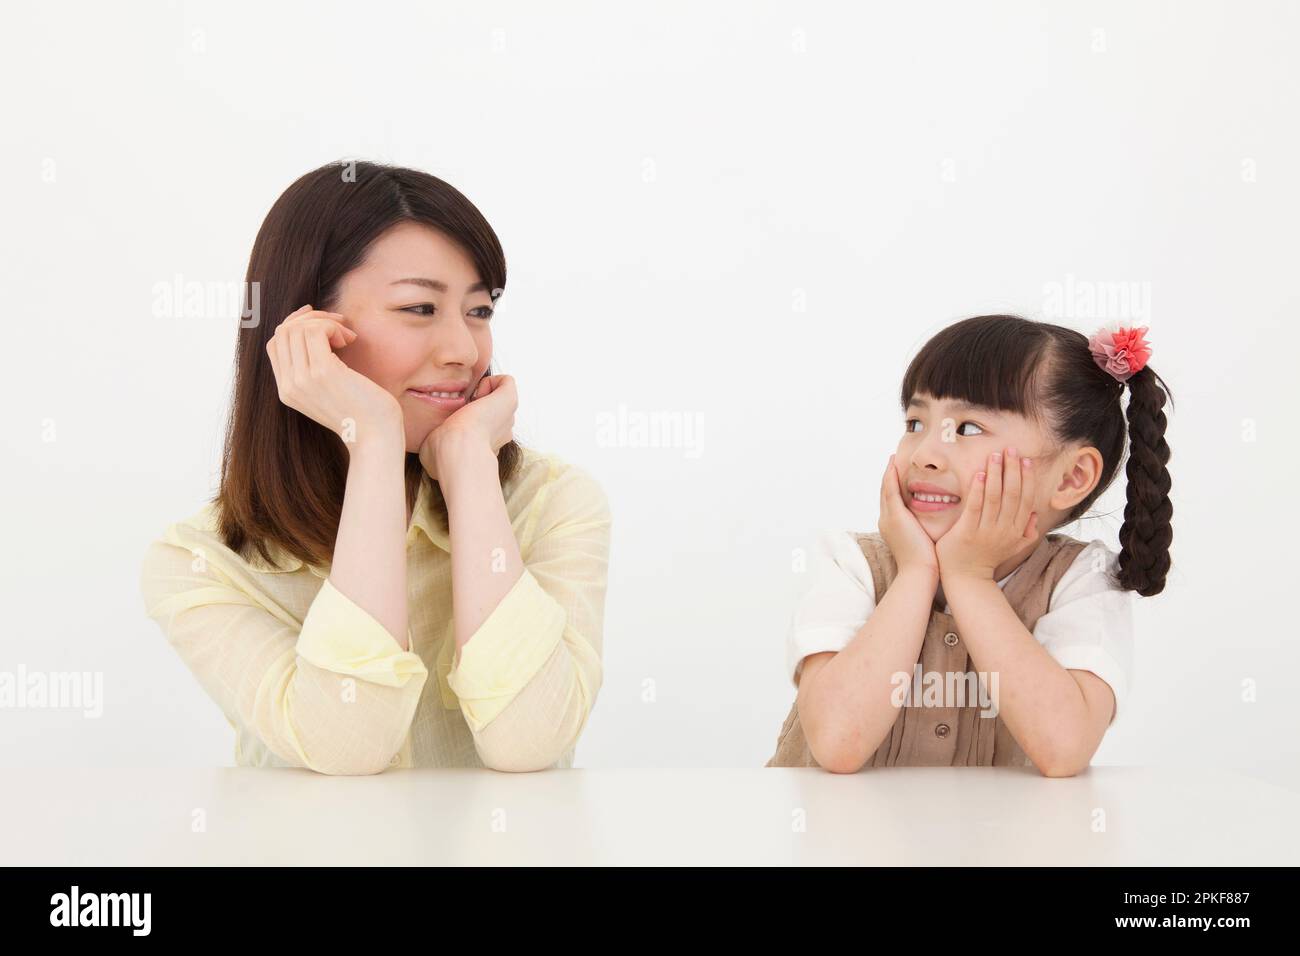 Smiling Woman And Girl Stock Photo